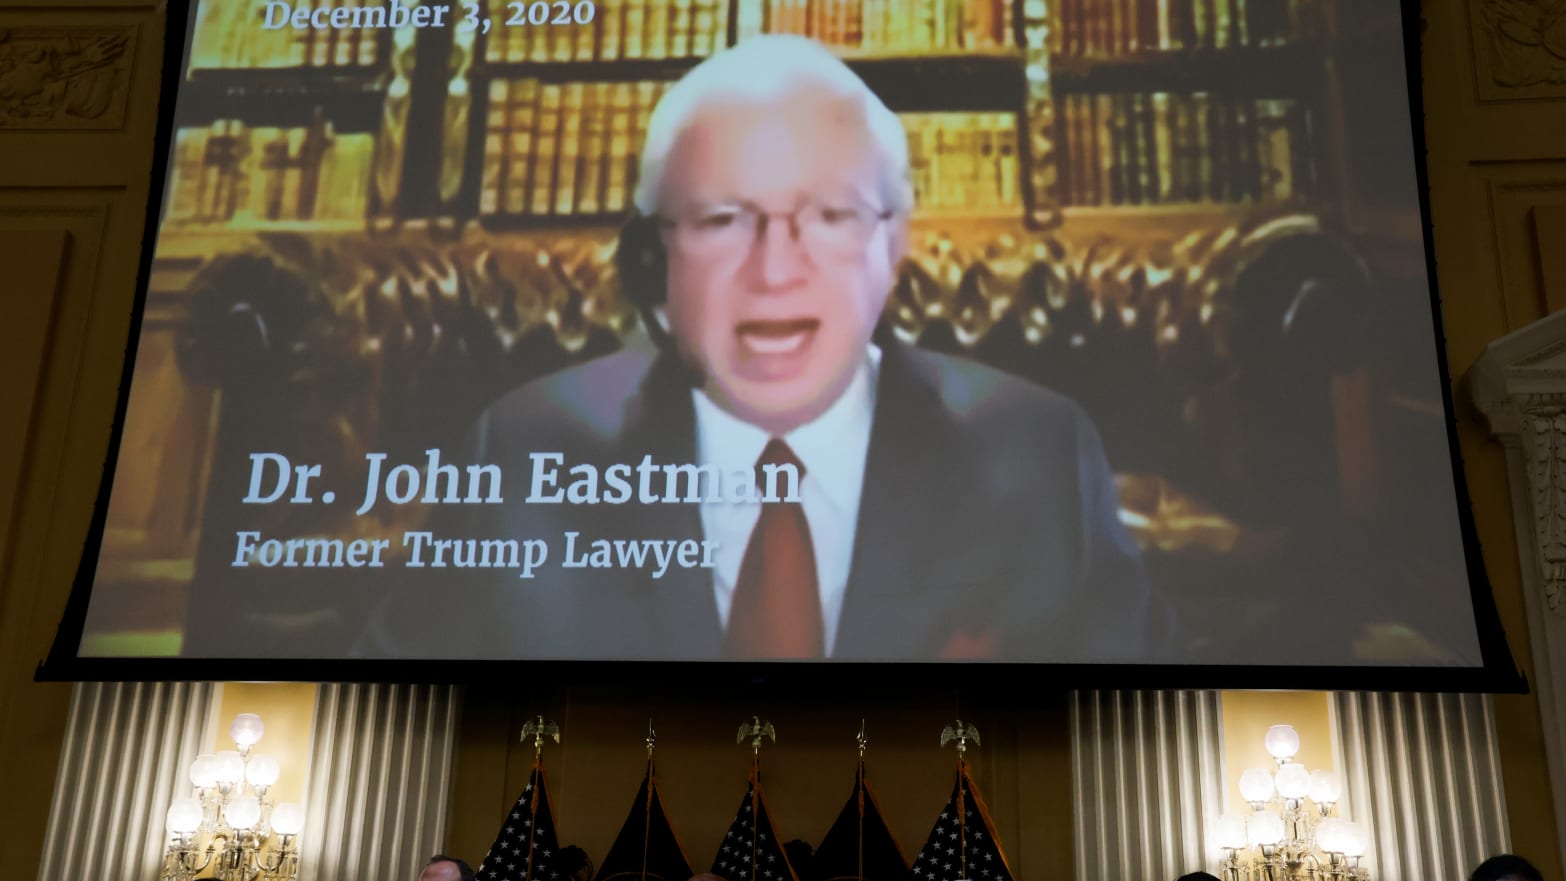 John Eastman, former attorney for former U.S. President Donald Trump, is seen speaking in a video.